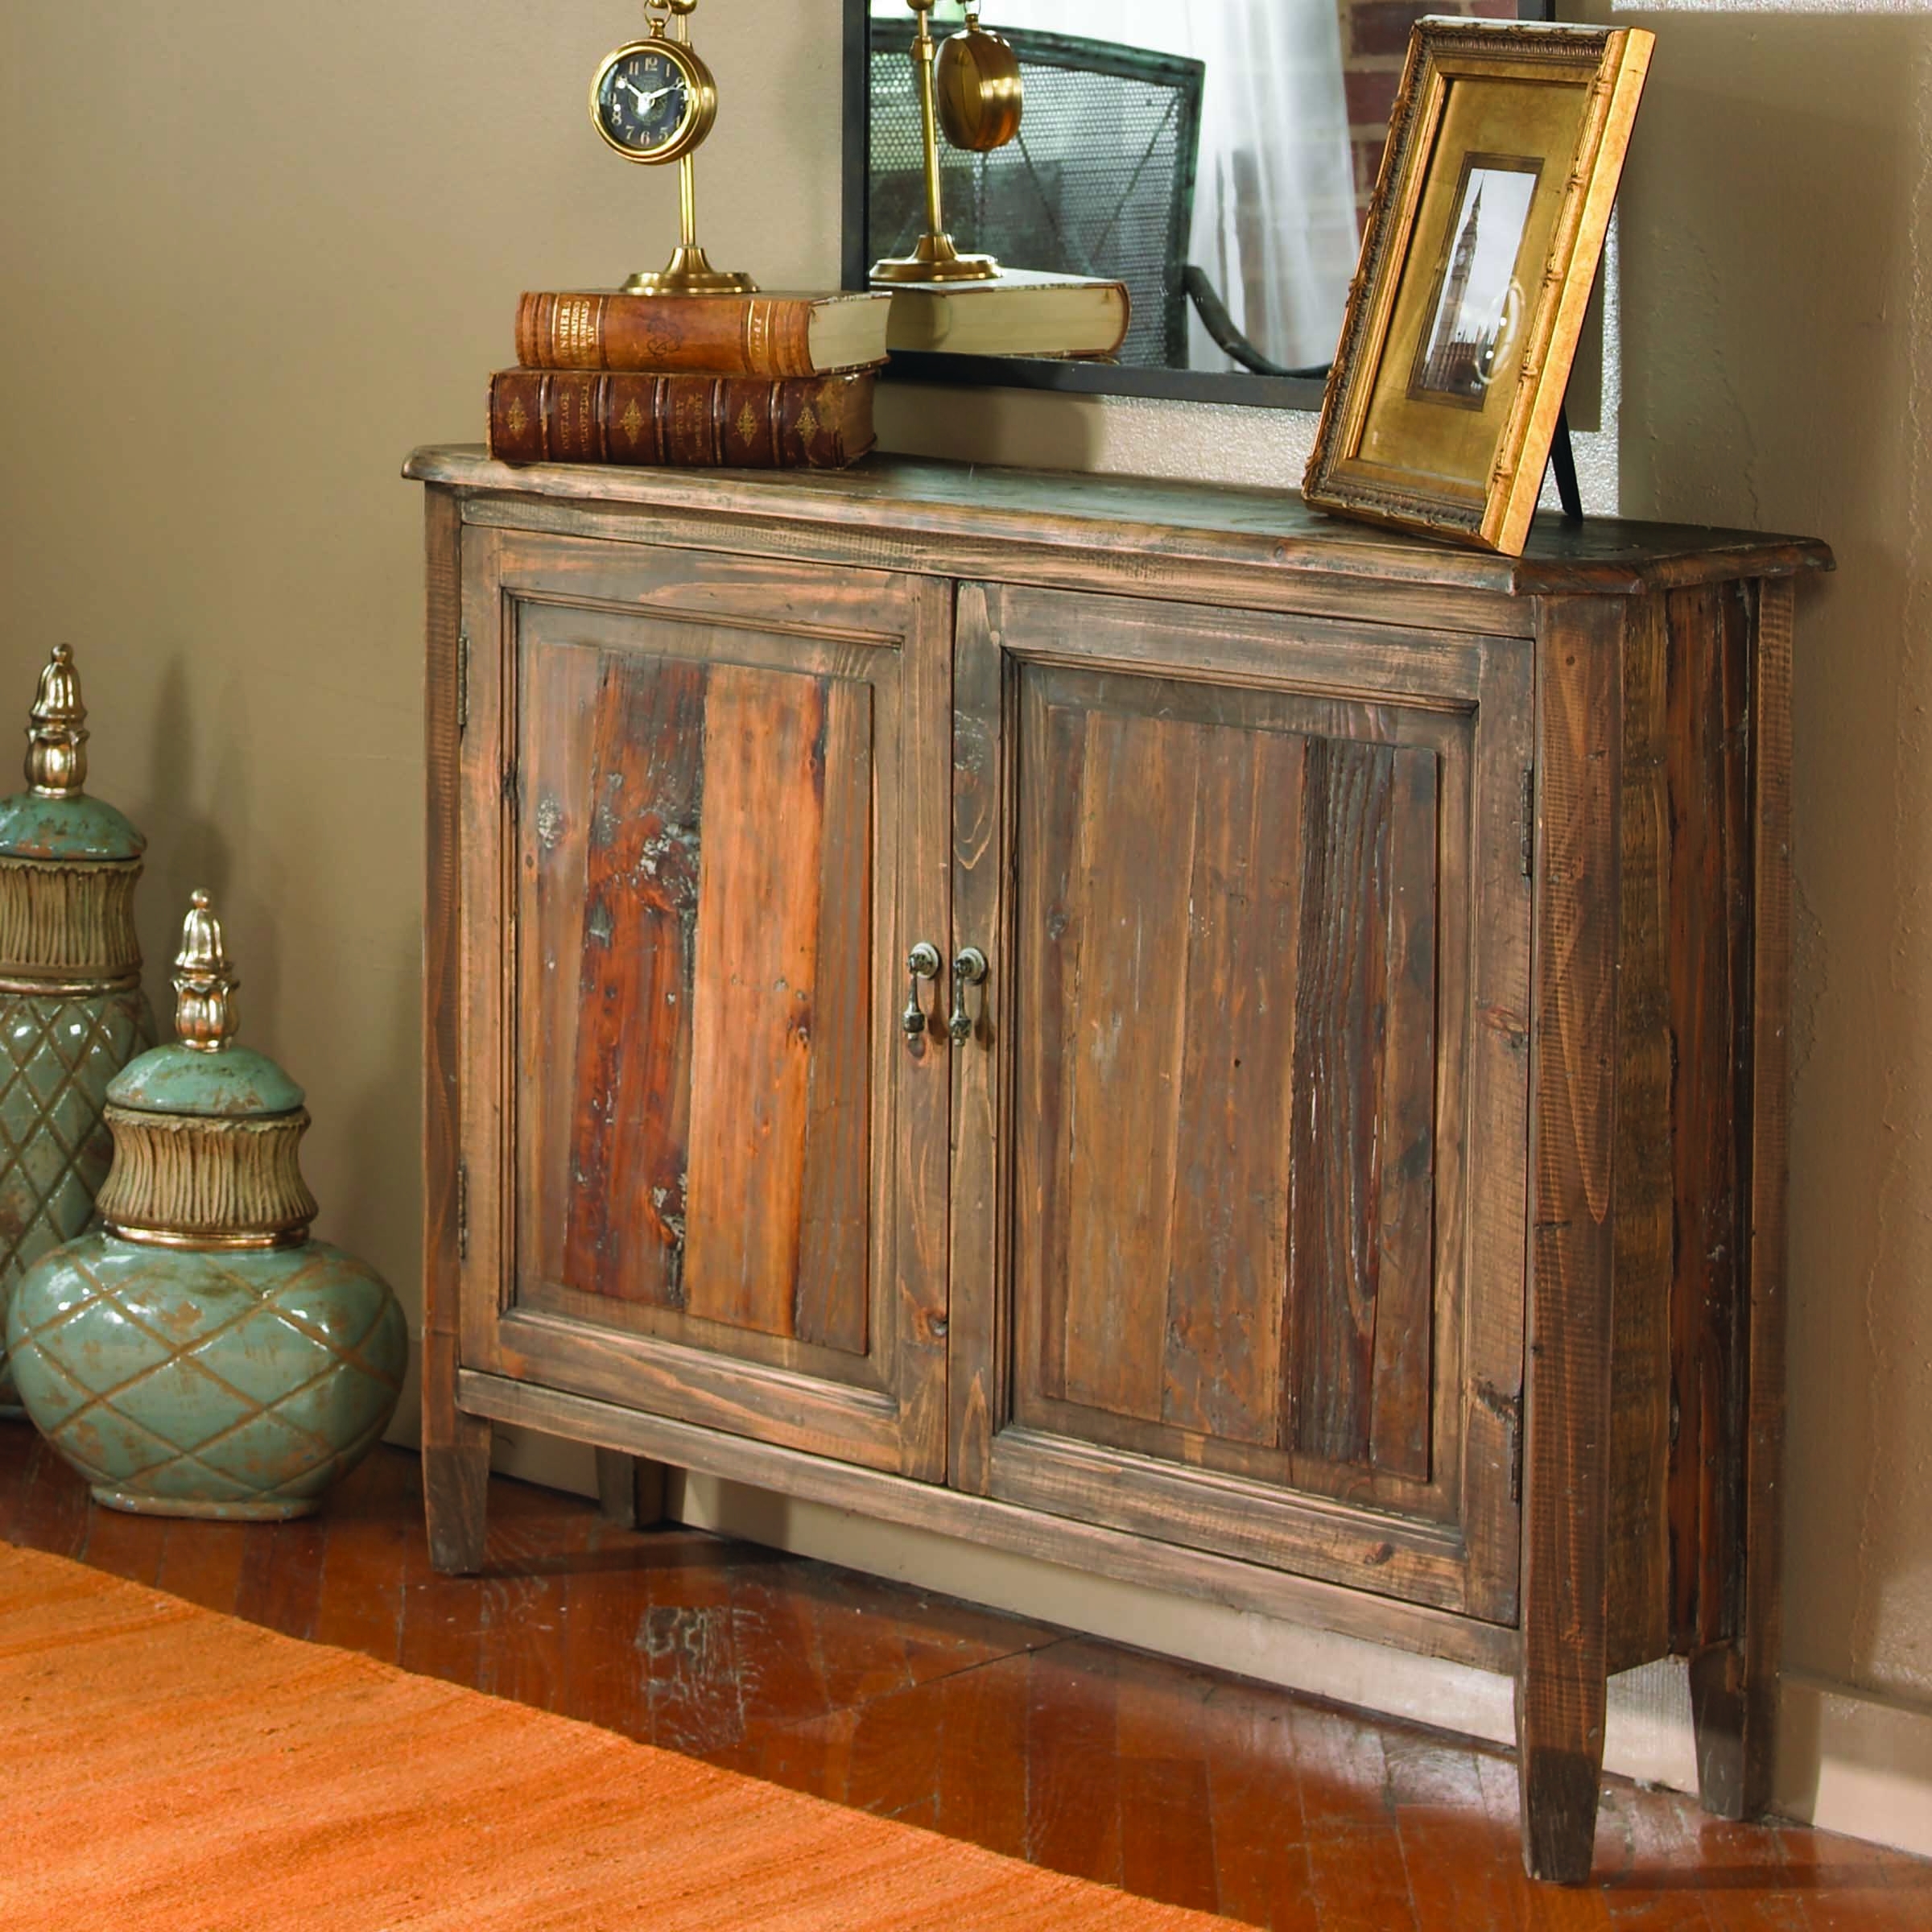 Altair Reclaimed Wood Console Cabinet - Image 0